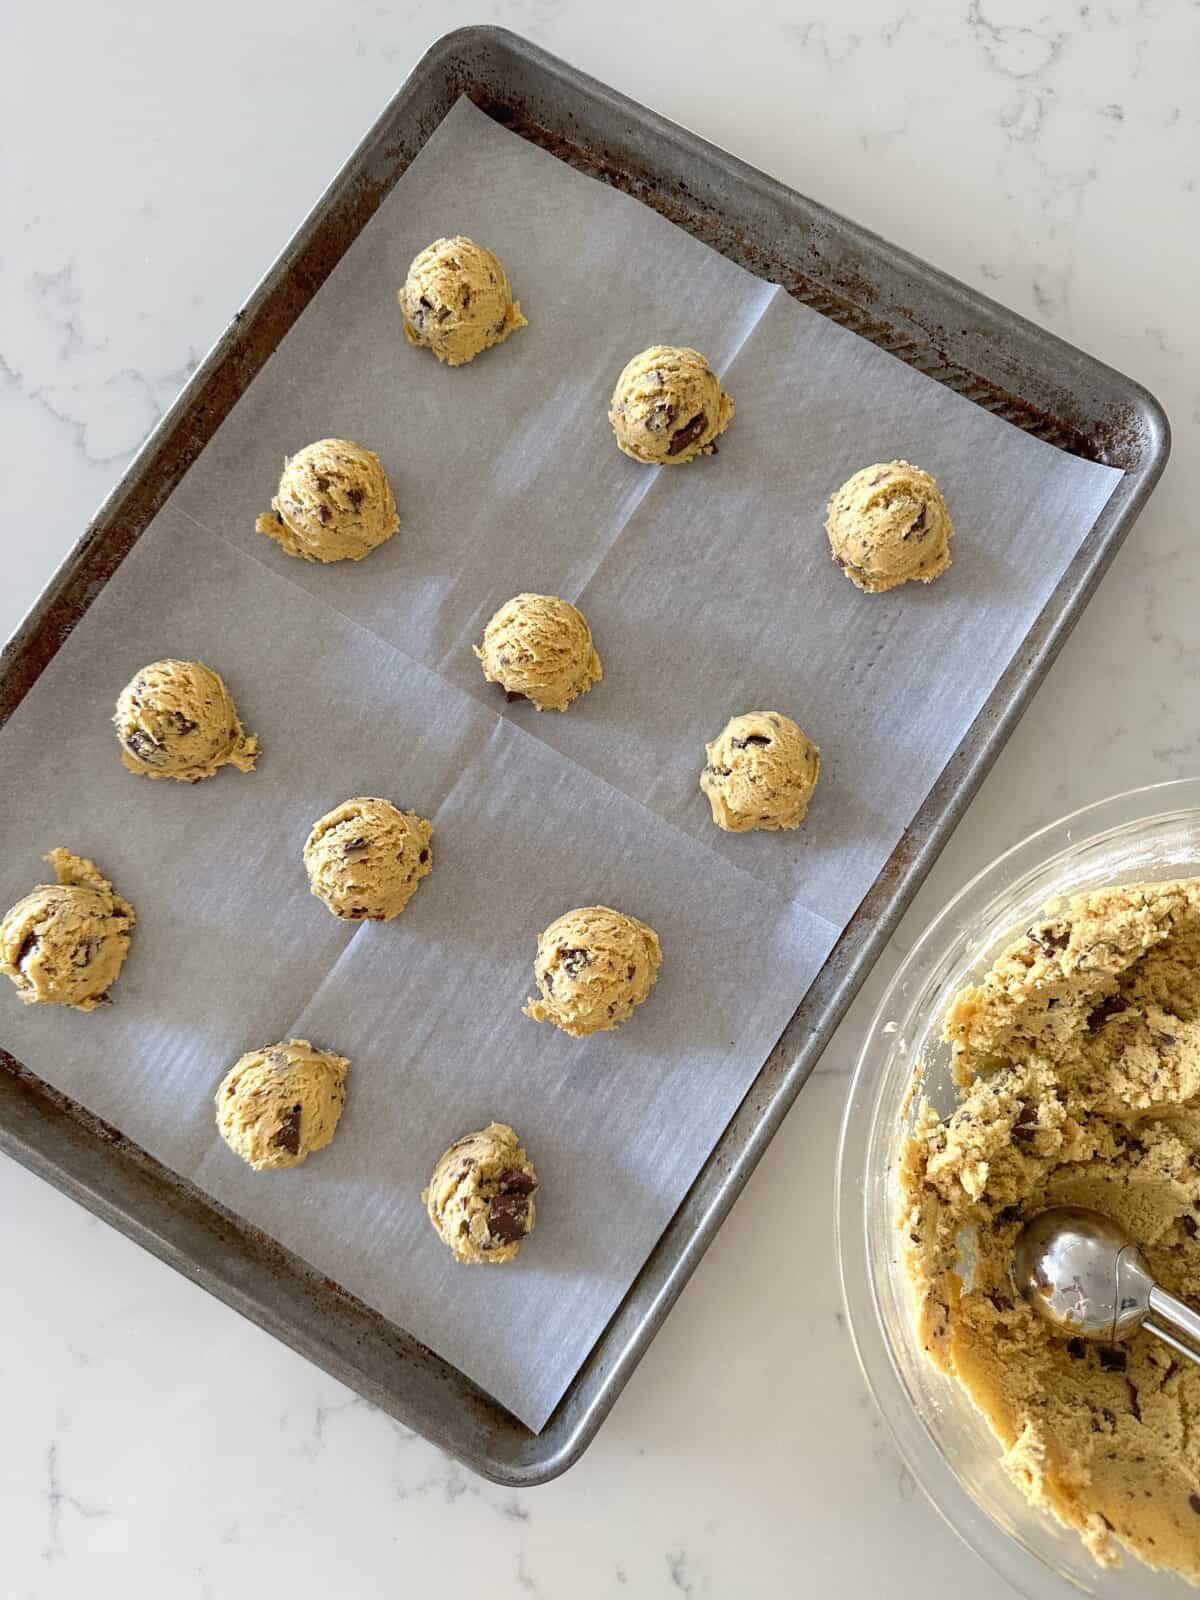 chewy chocolate chip cookie dough on baking sheet ready to bake